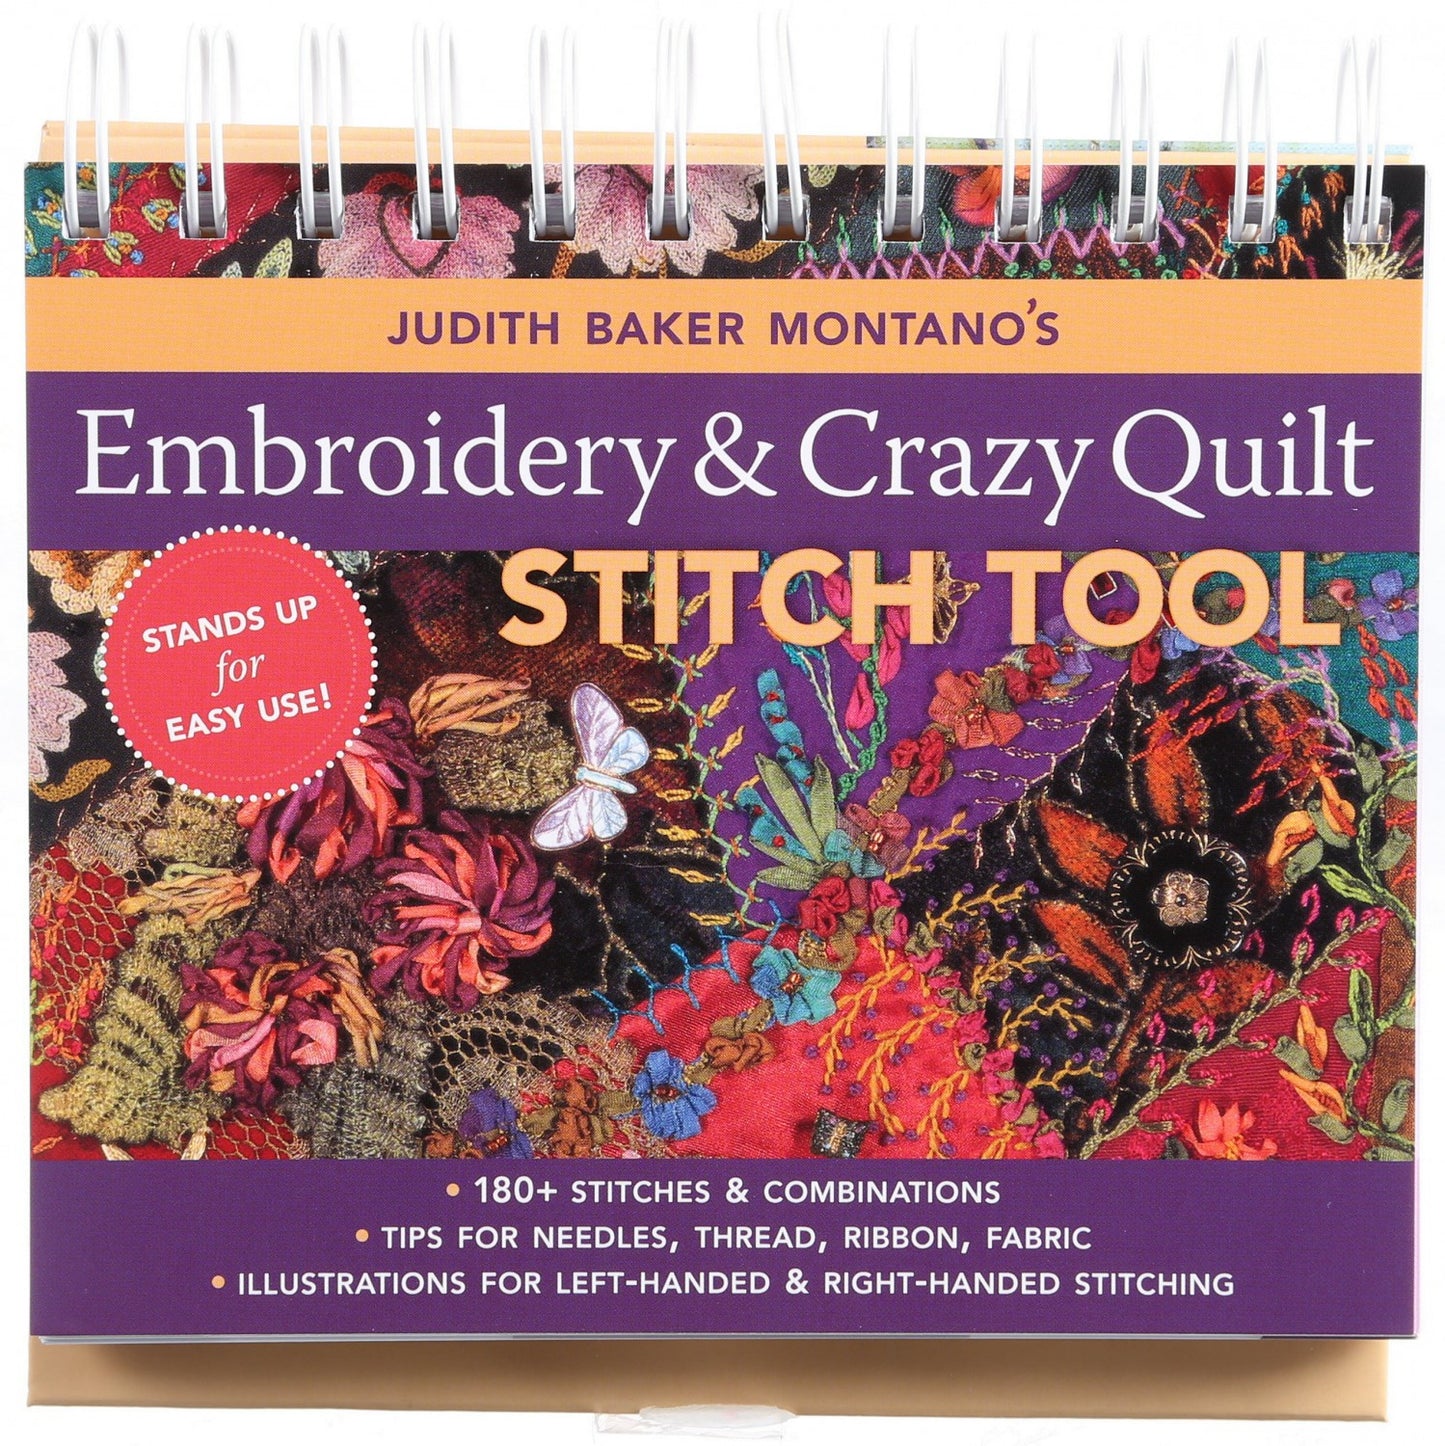 Judith Baker Montano's Embroidery & Crazy Quilt Stitch Tool # 10644